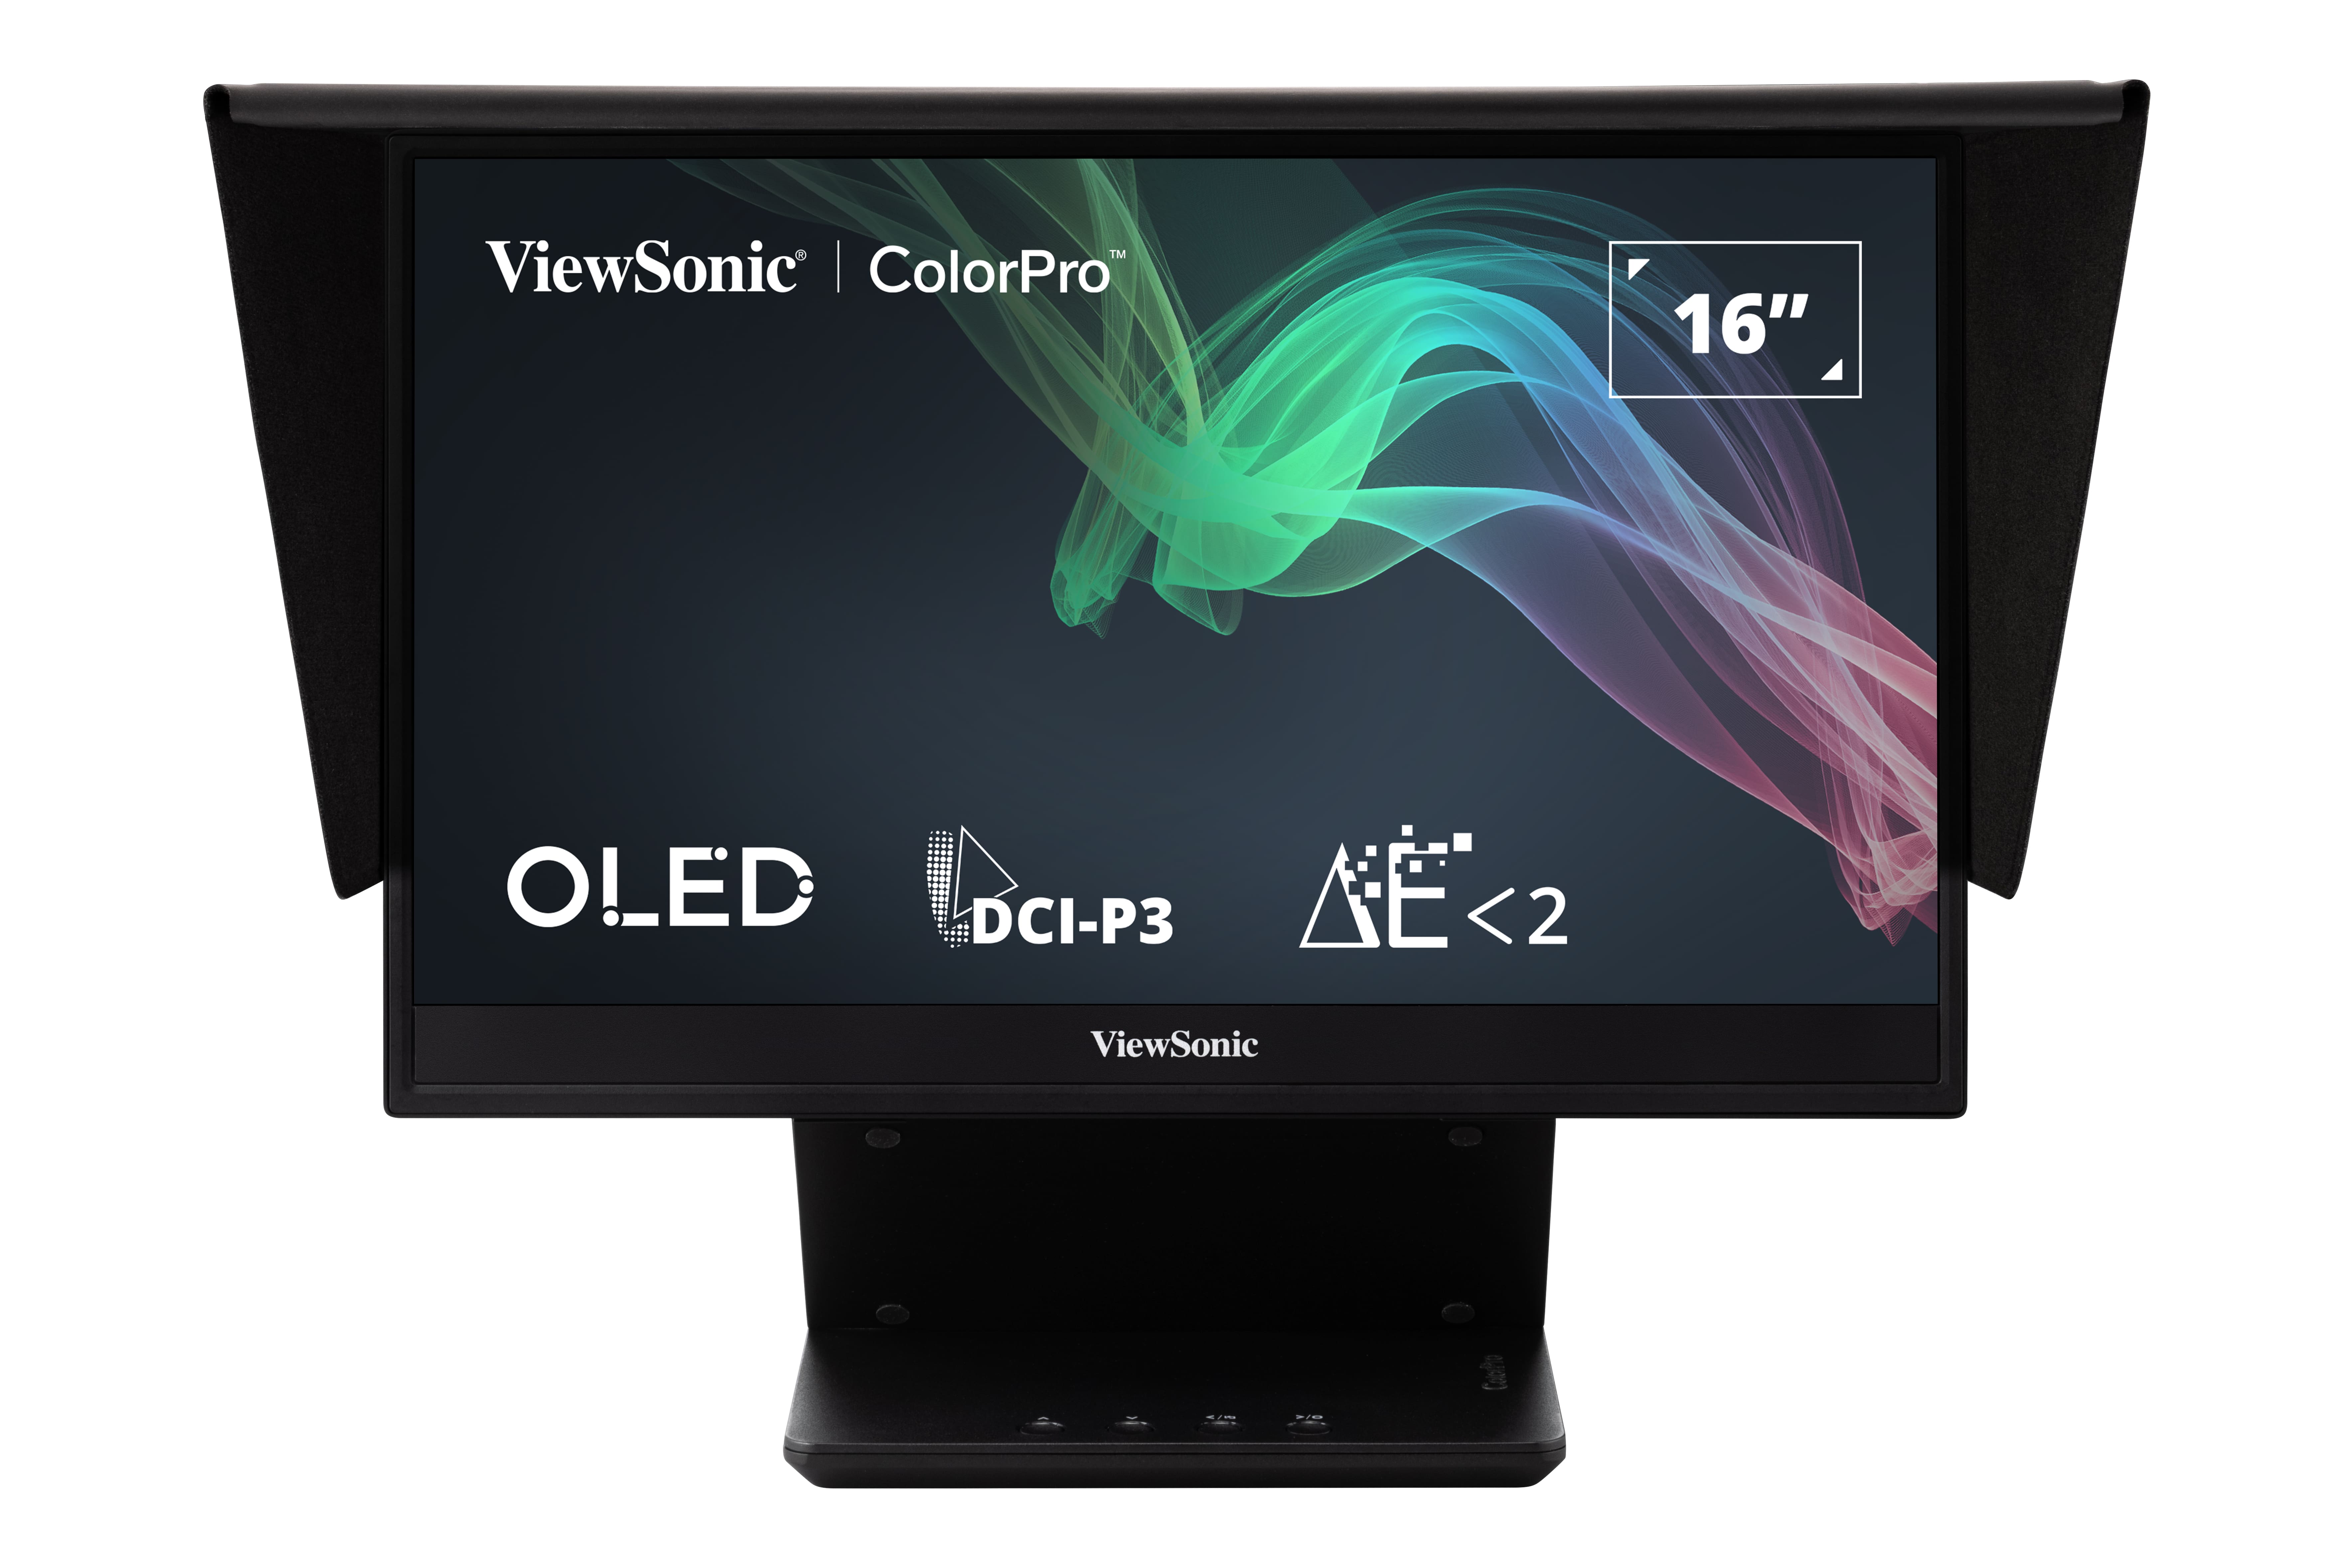 ViewSonic's ColorPro VP16-OLED Portable Monitor